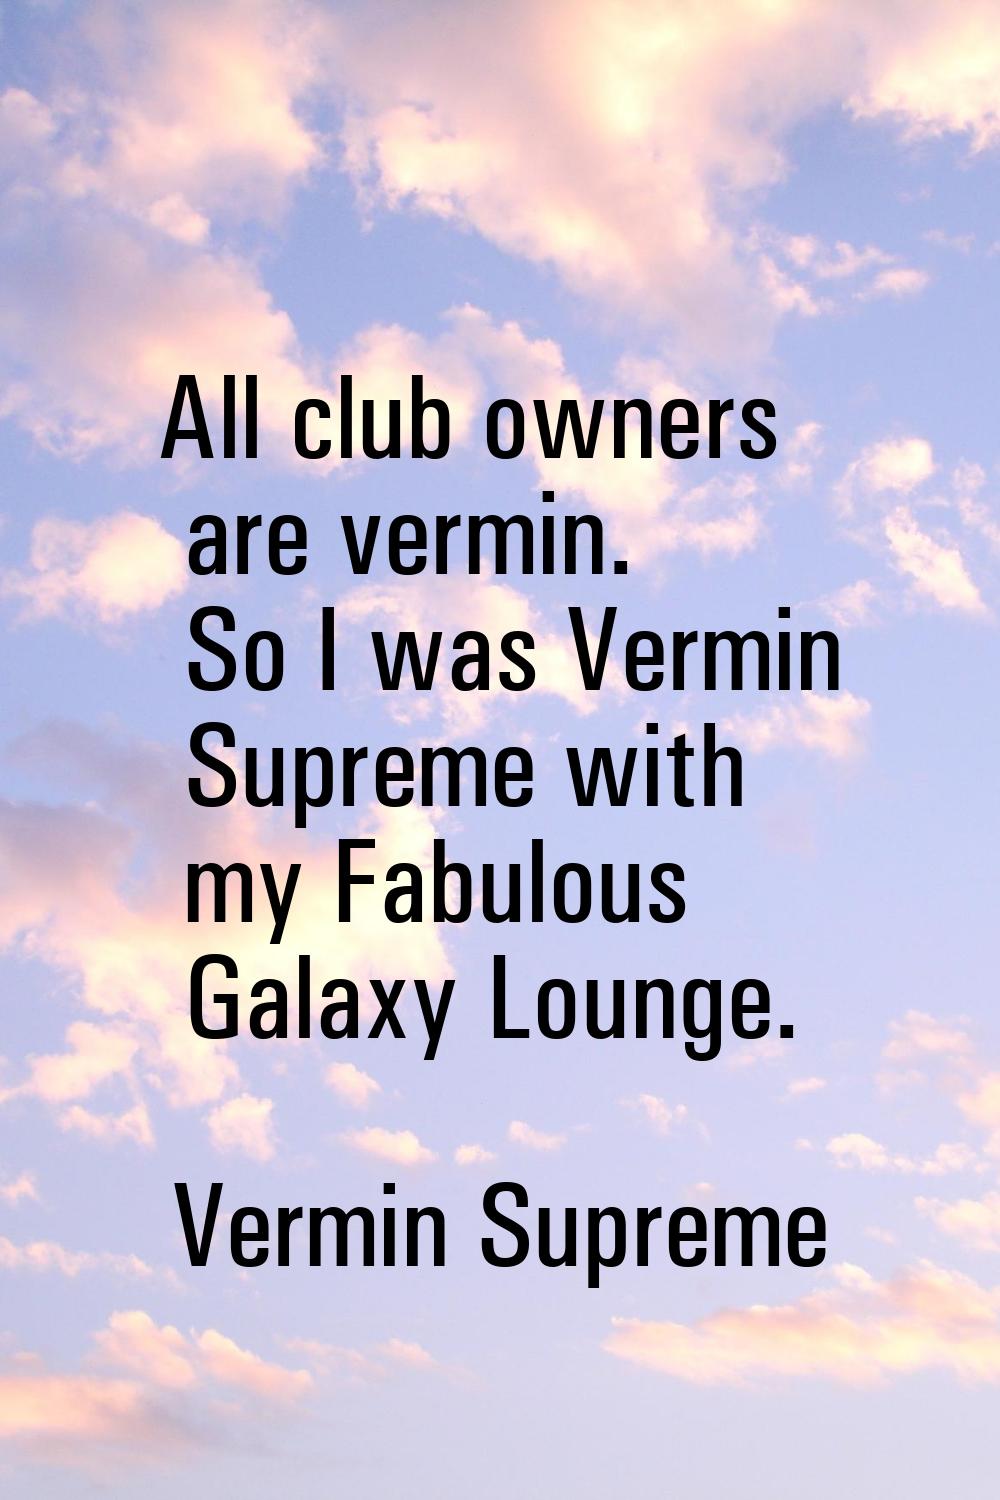 All club owners are vermin. So I was Vermin Supreme with my Fabulous Galaxy Lounge.